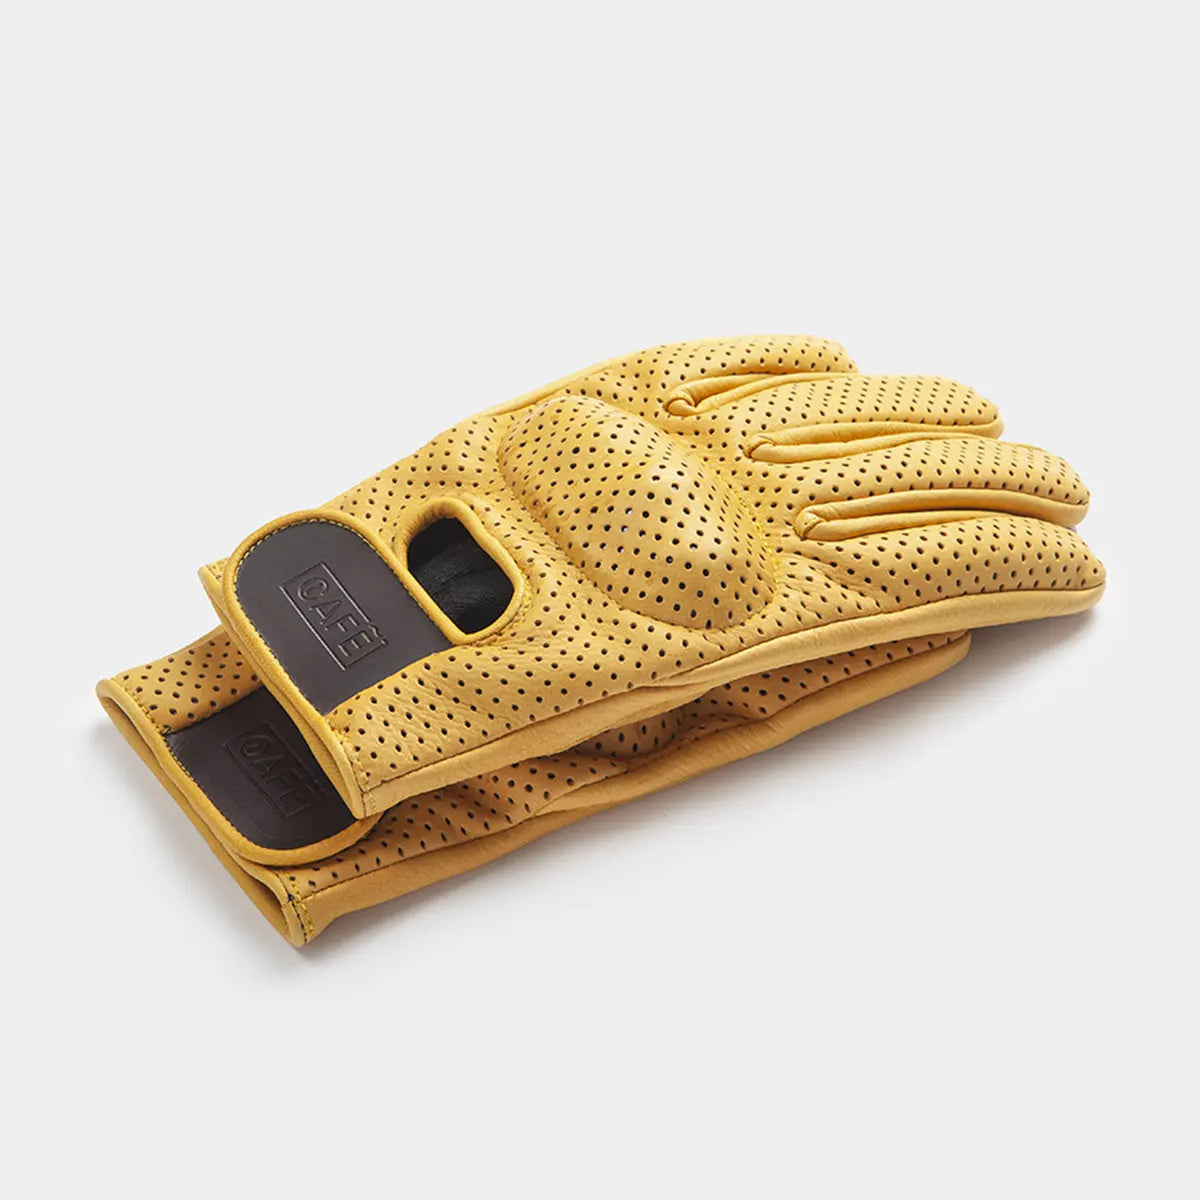 The Dirt Gloves Carbon/Kevlar in Cream